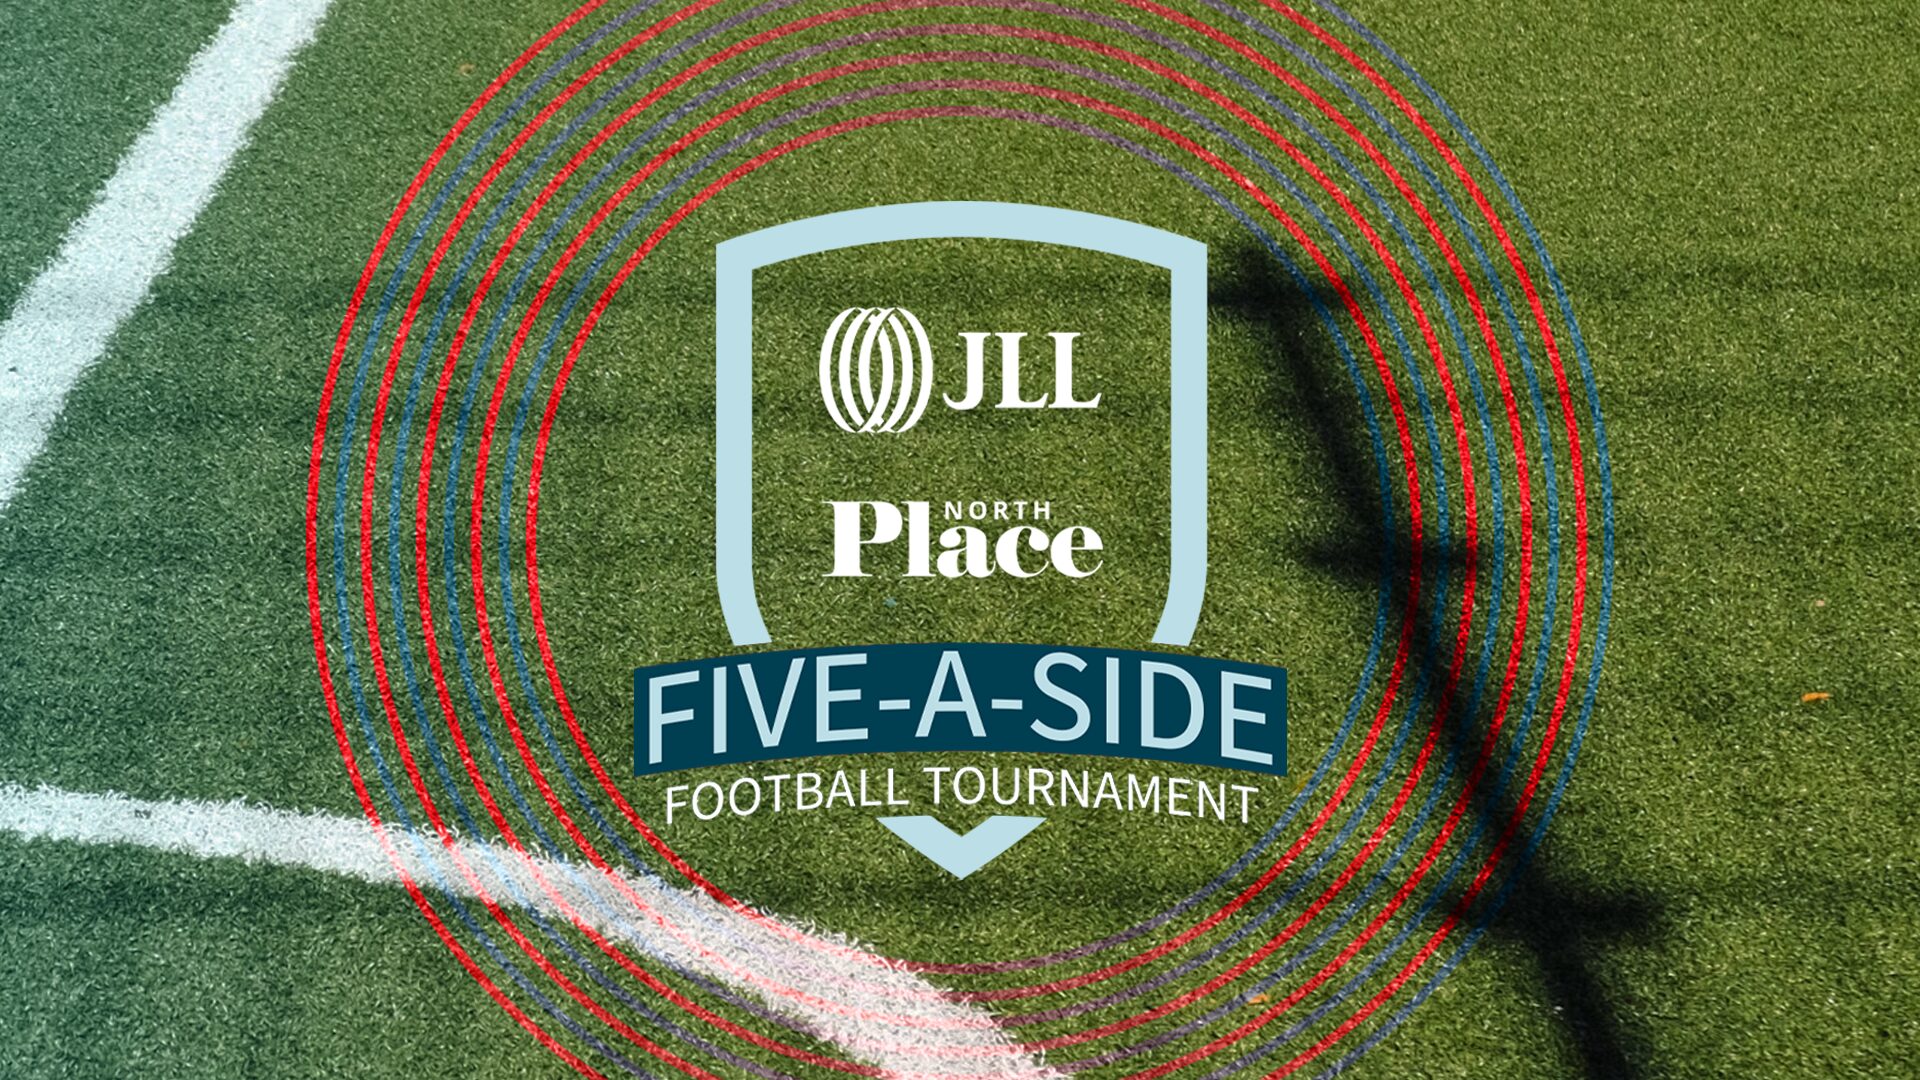 Crest logo for the JLL Five-a-Side Football Tournament over the corner of a football pitch